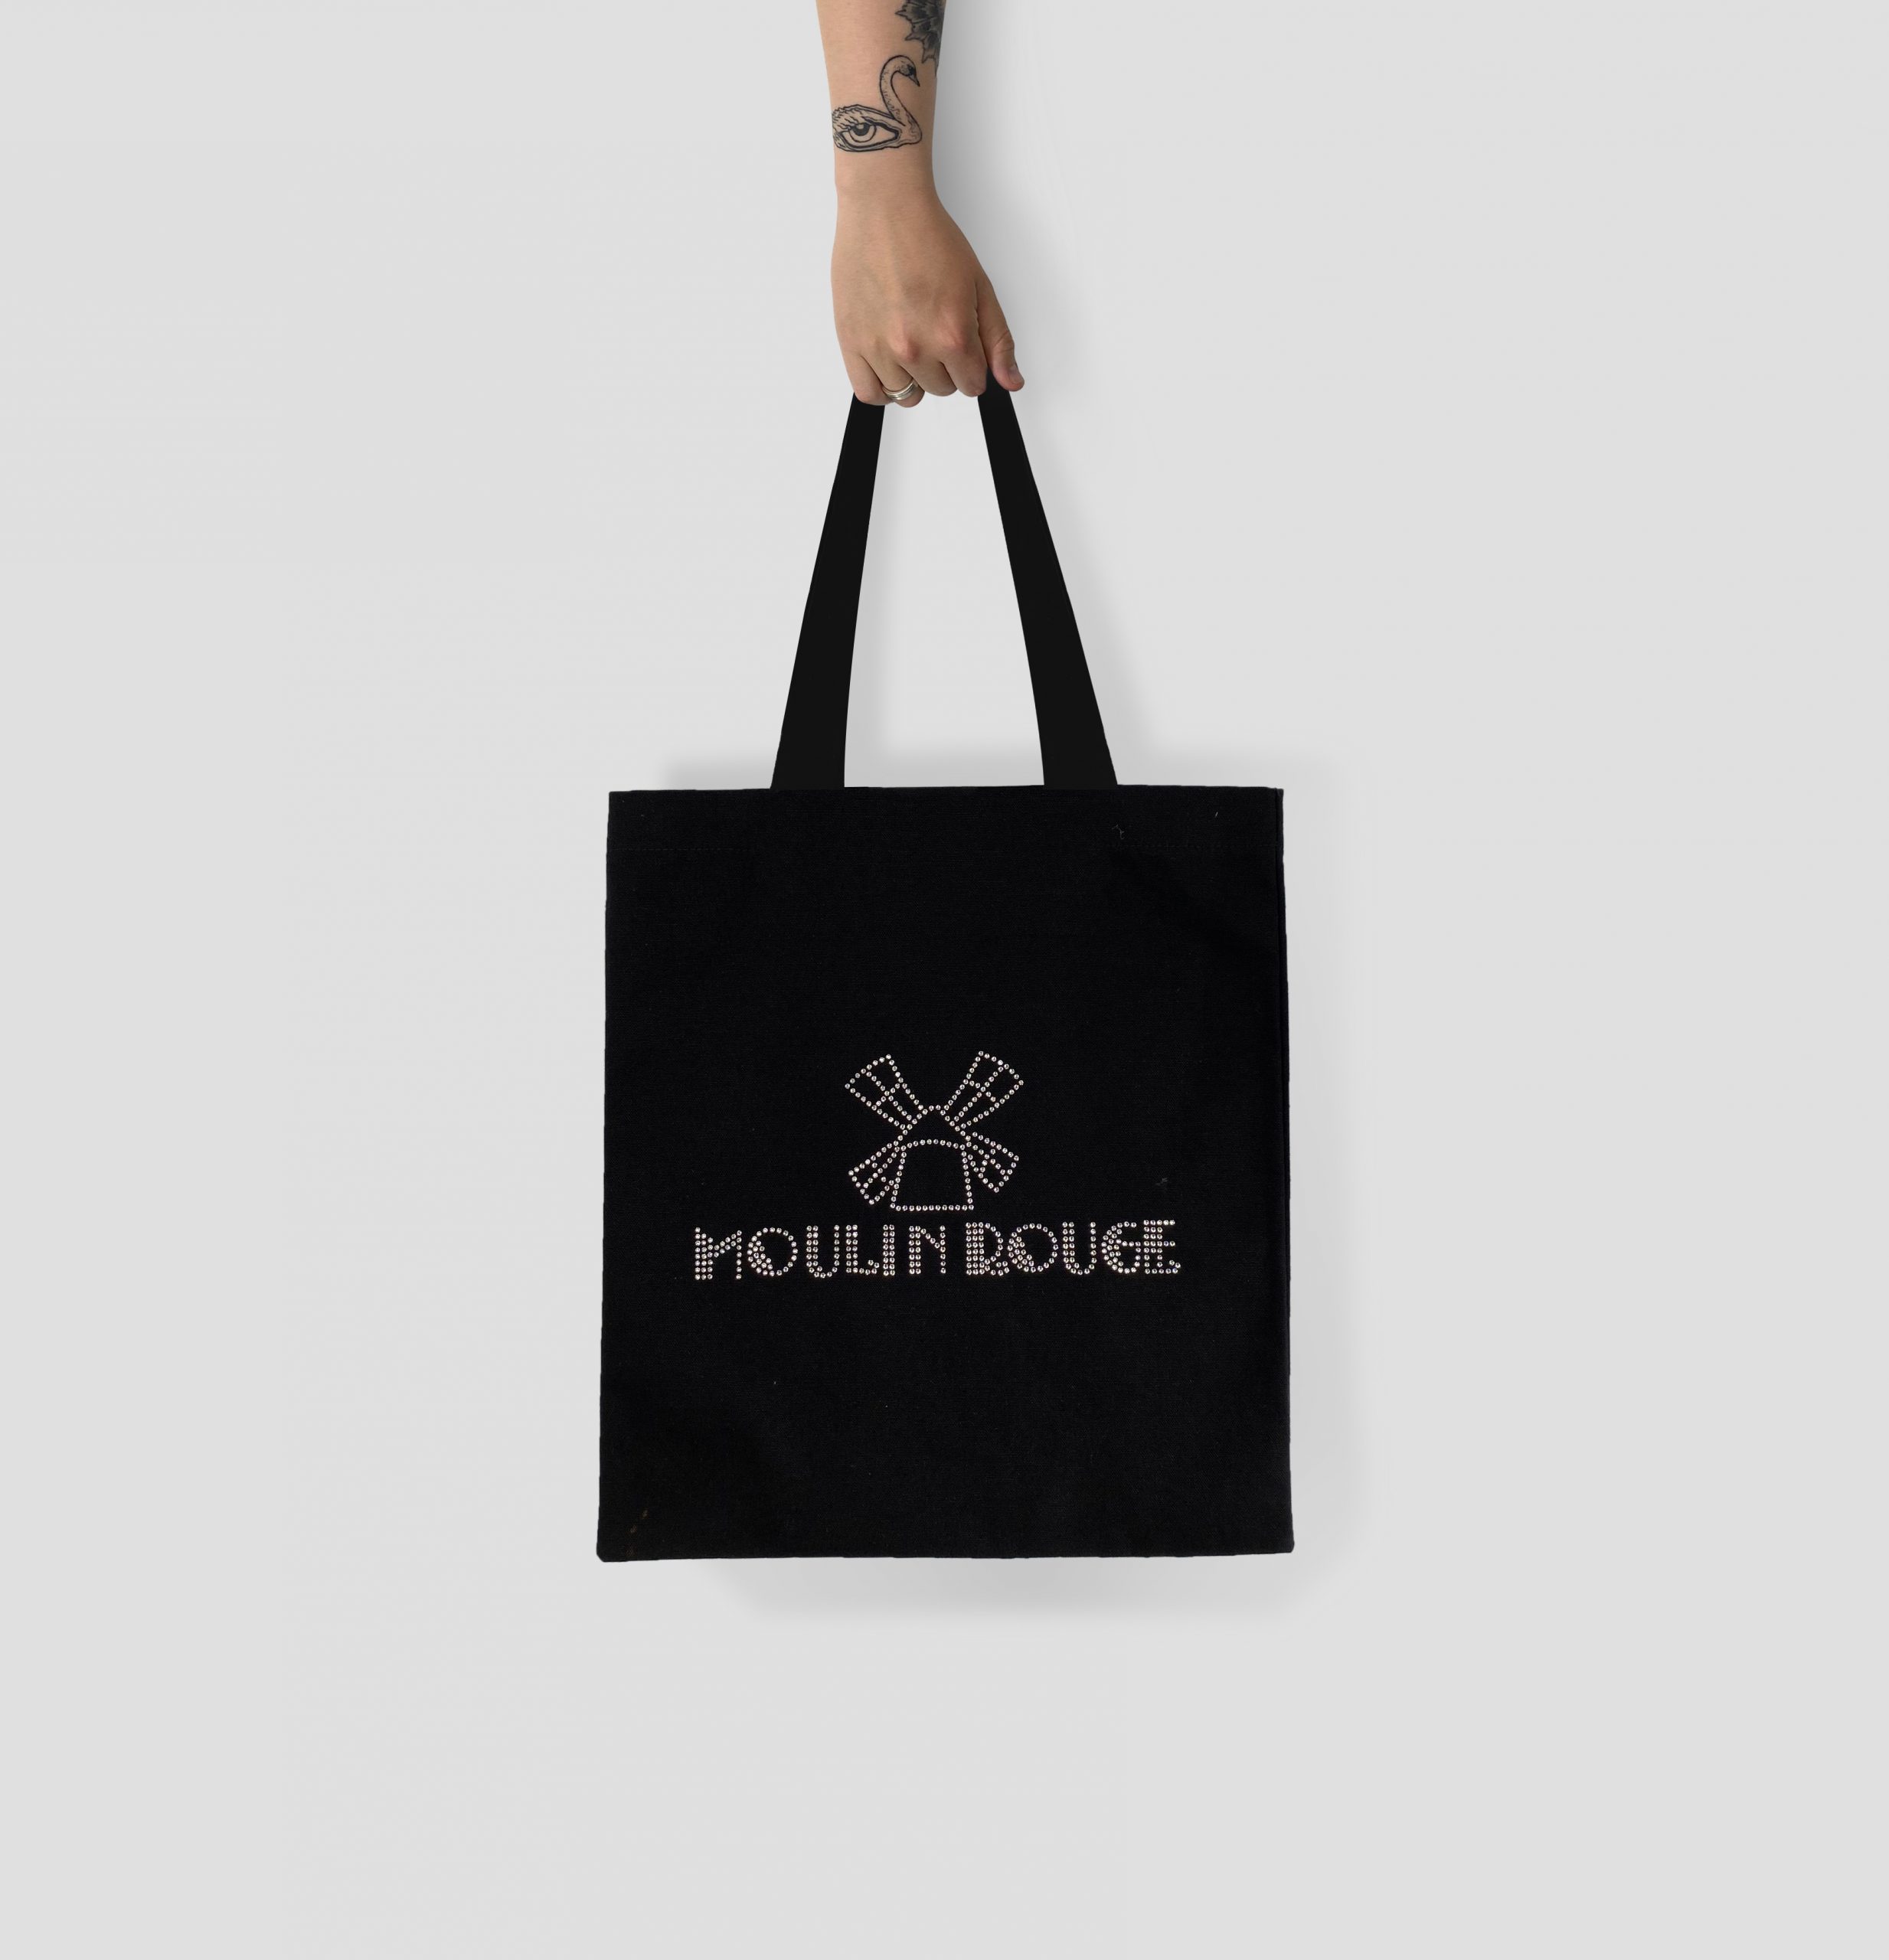 Moulin Rouge – Canvas Tote Bags